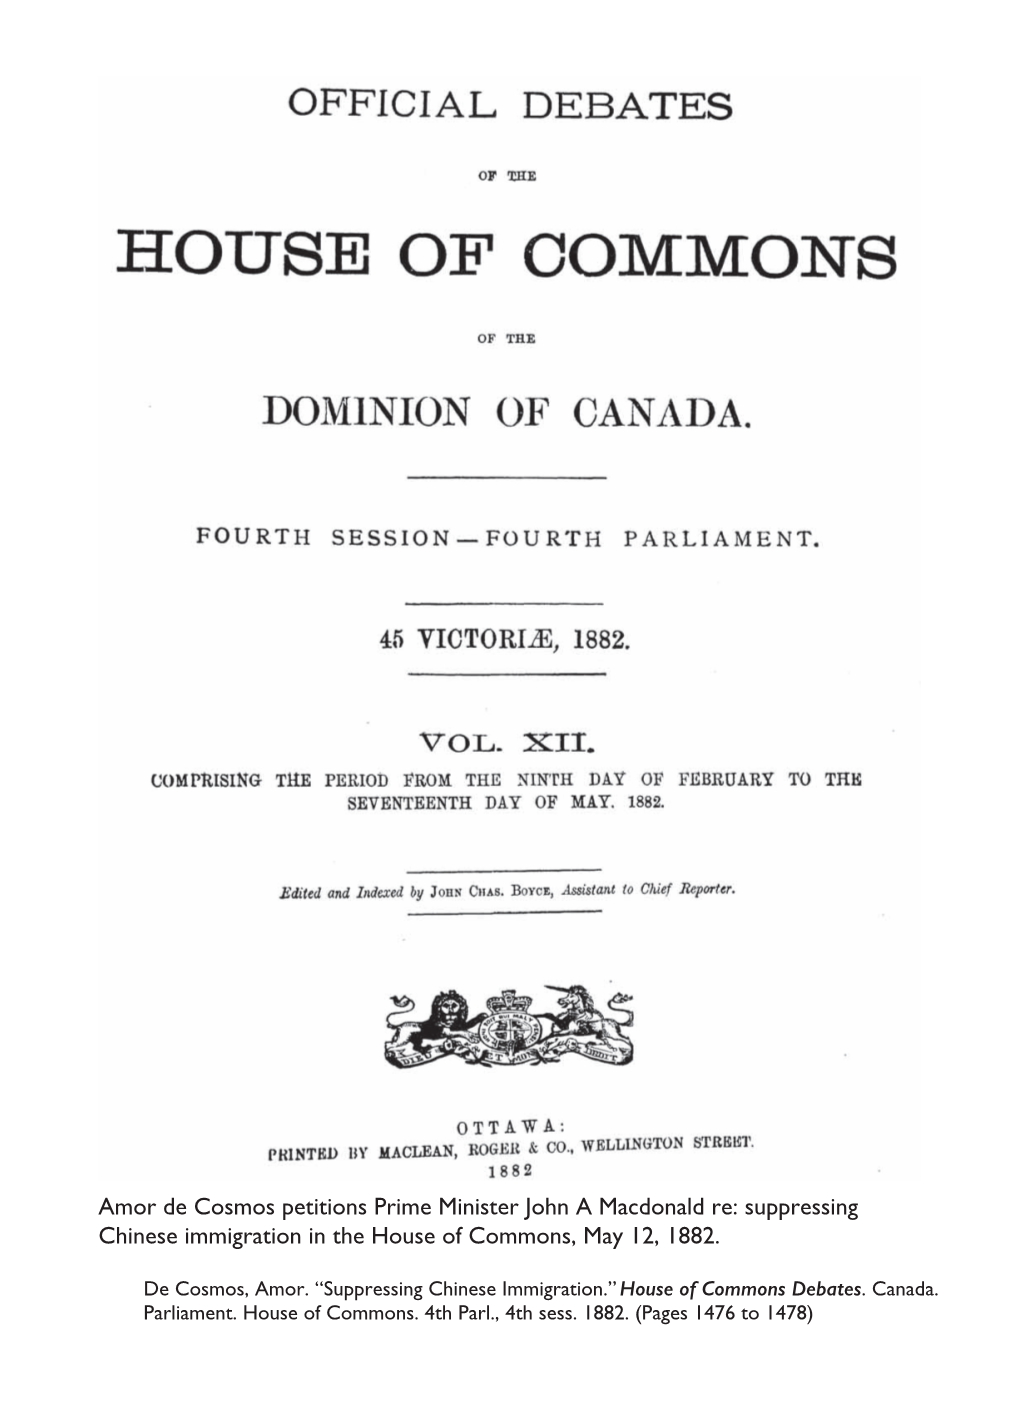 Amor De Cosmos Petitions Prime Minister John a Macdonald Re: Suppressing Chinese Immigration in the House of Commons, May 12, 1882